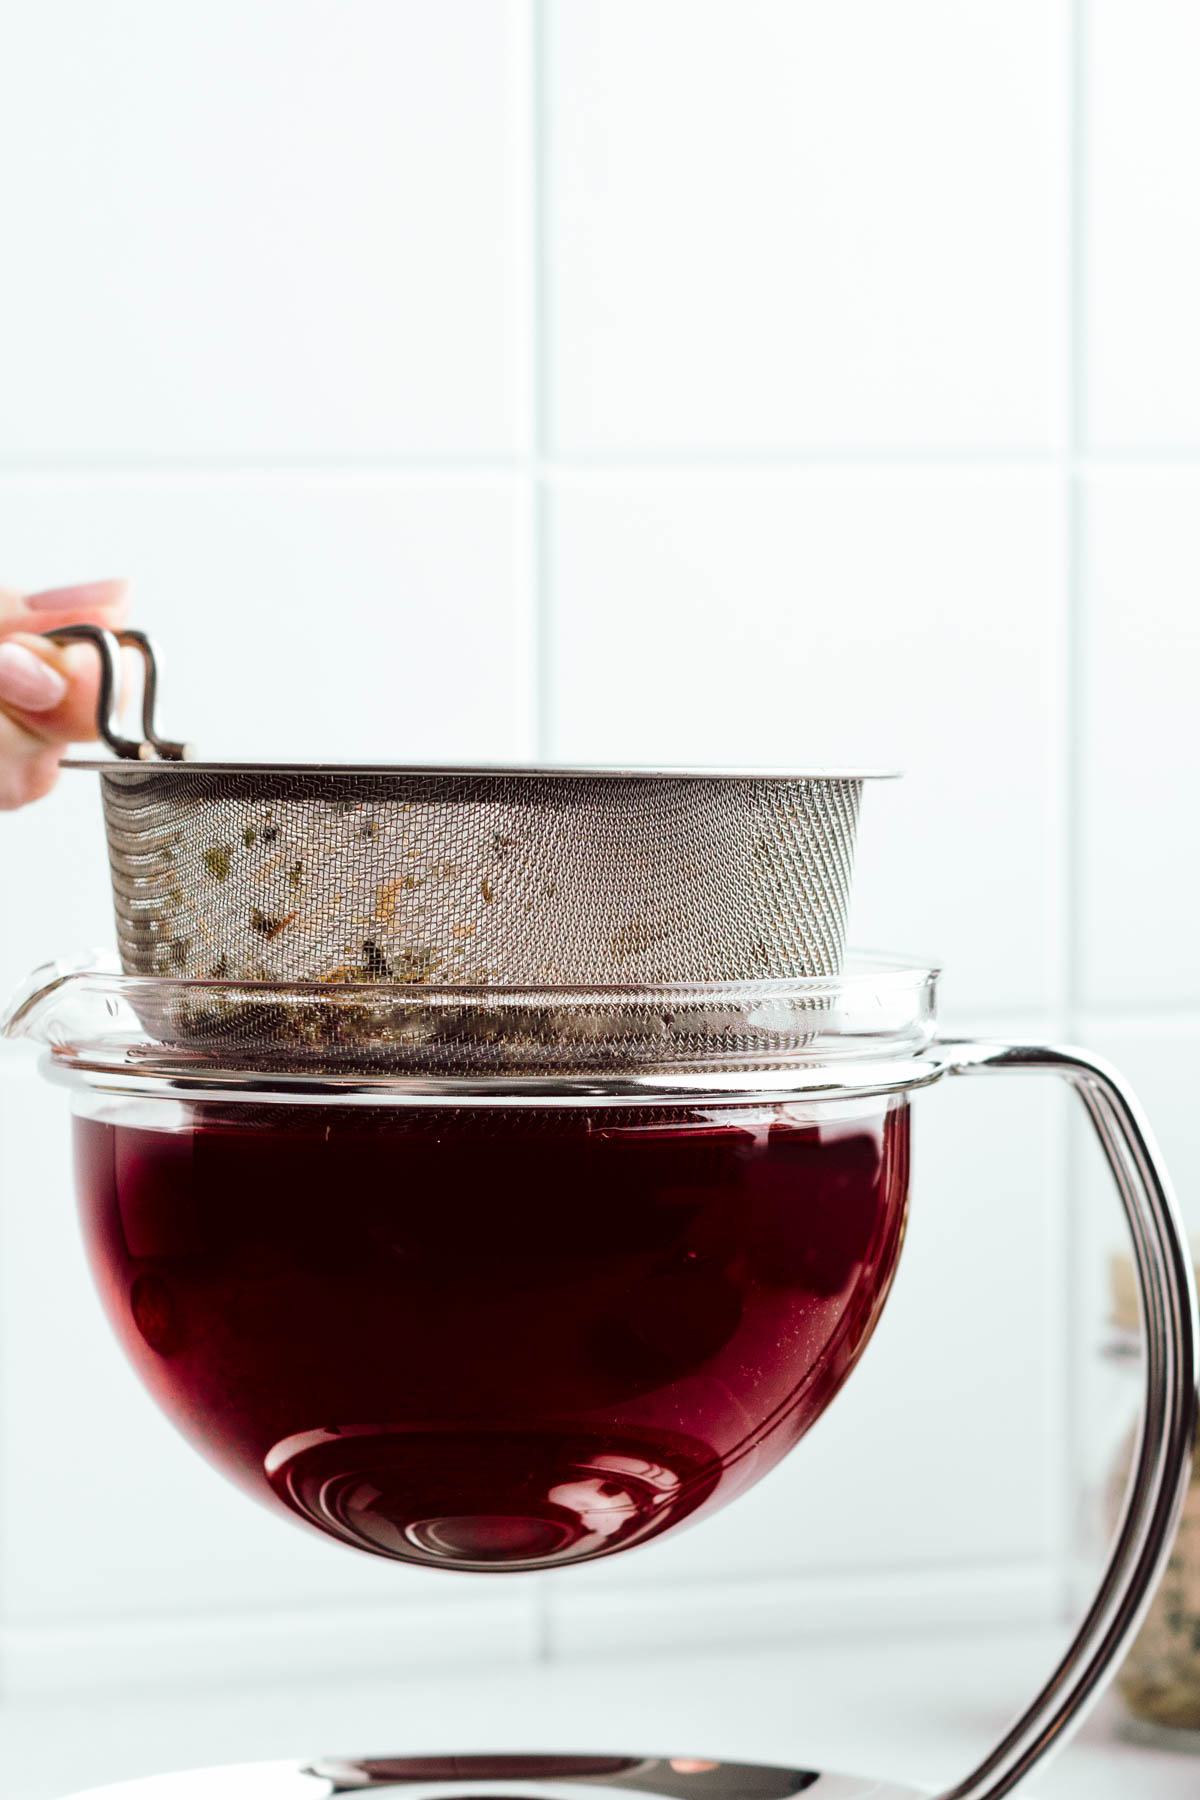 A glass teapot with dark red colored tea in it and a hand lifting the strainer out of the teapot in front of a white tiled backdrop.